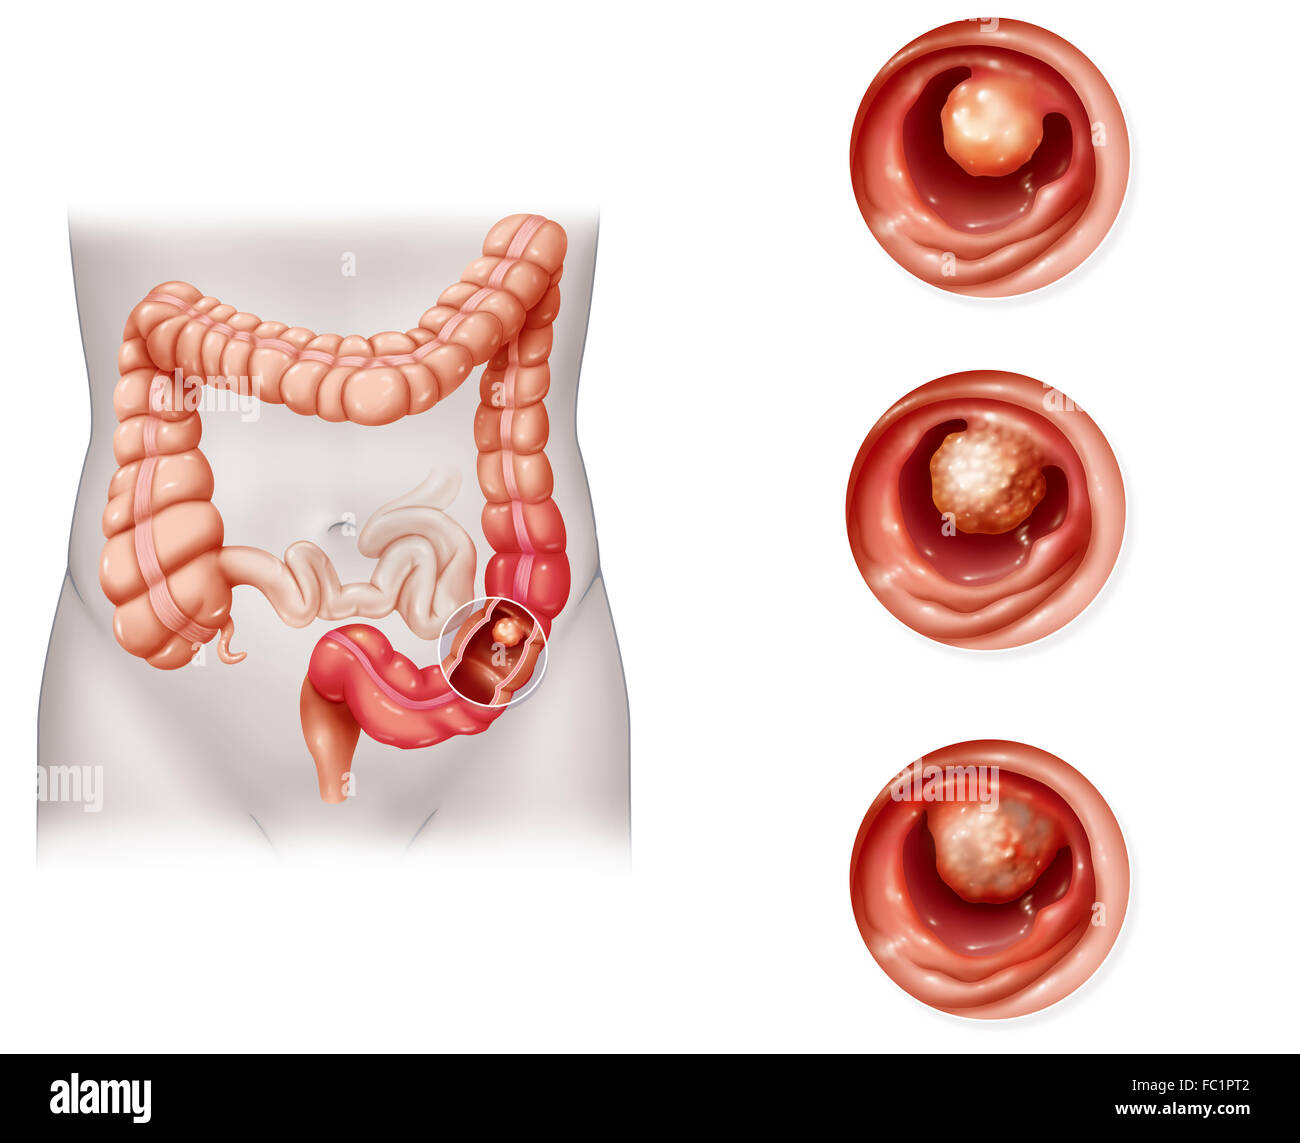 CANCER OF THE COLON, DRAWING Stock Photo